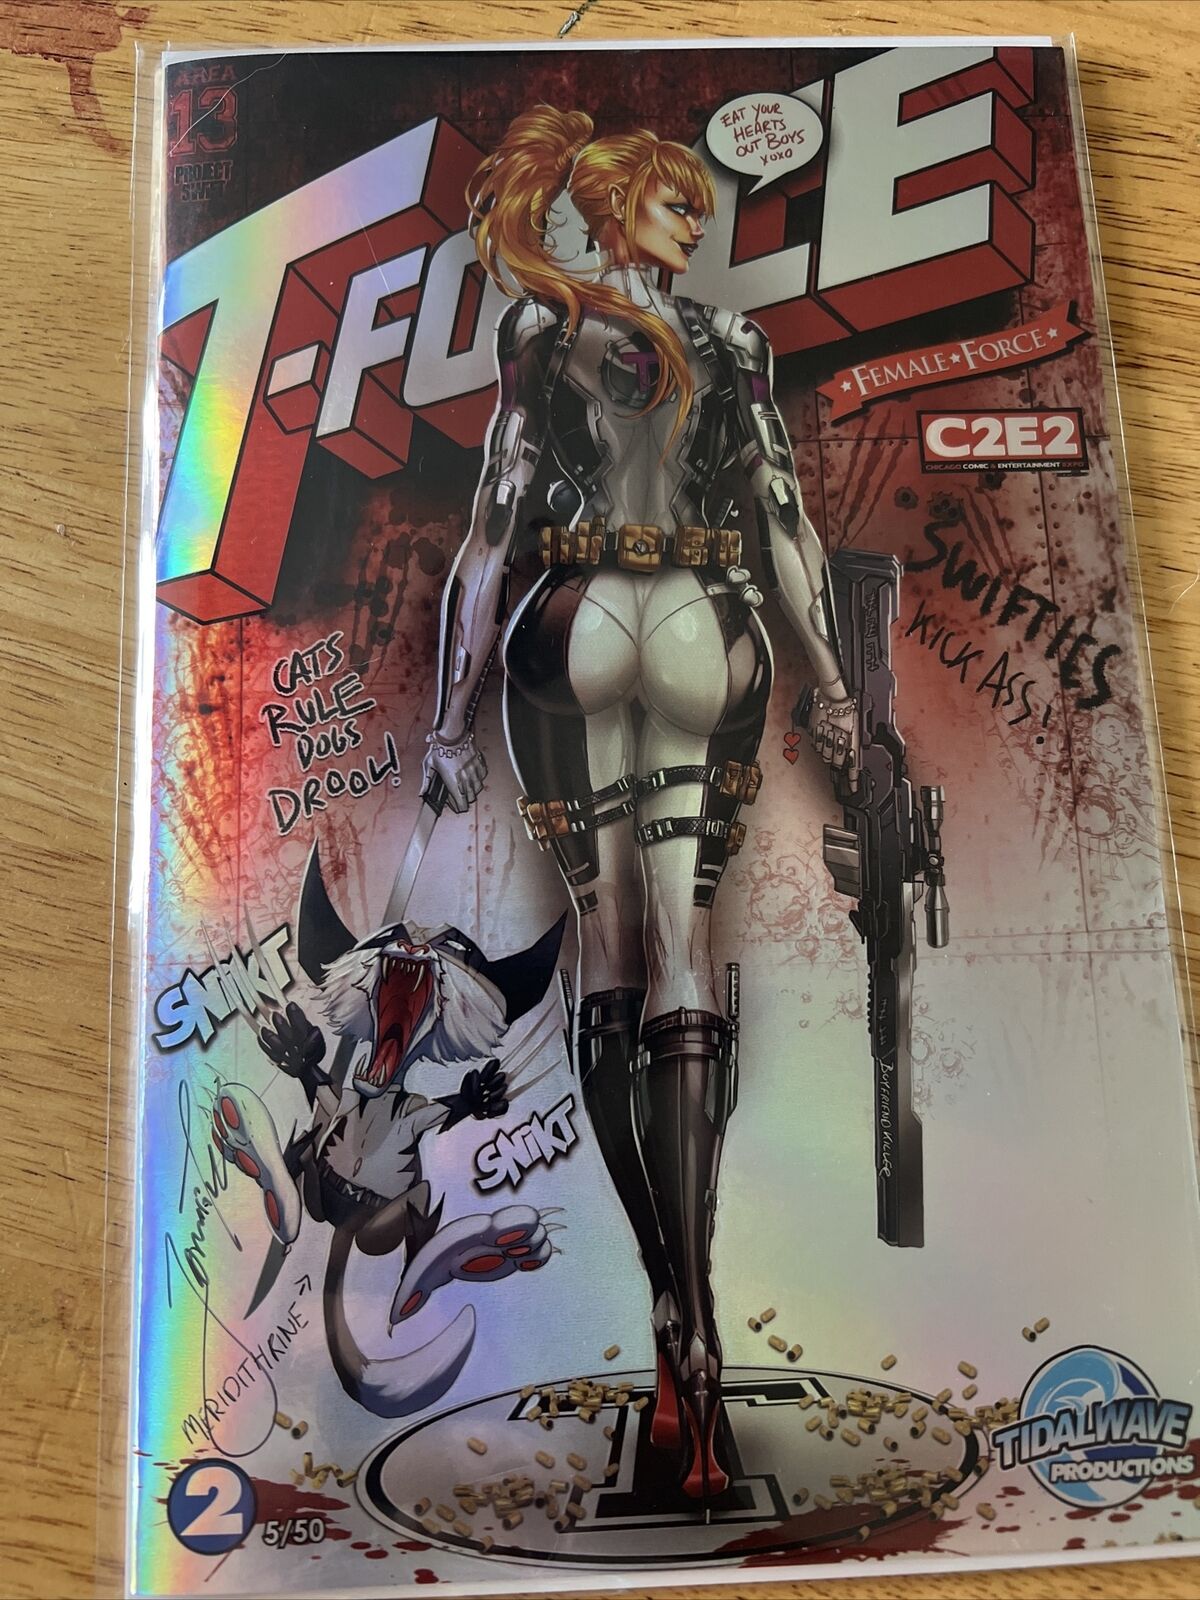 TAYLOR SWIFT Female Force 2 C2E2 Exclusive FOIL COVER # 5/50  Signed by Tyndall